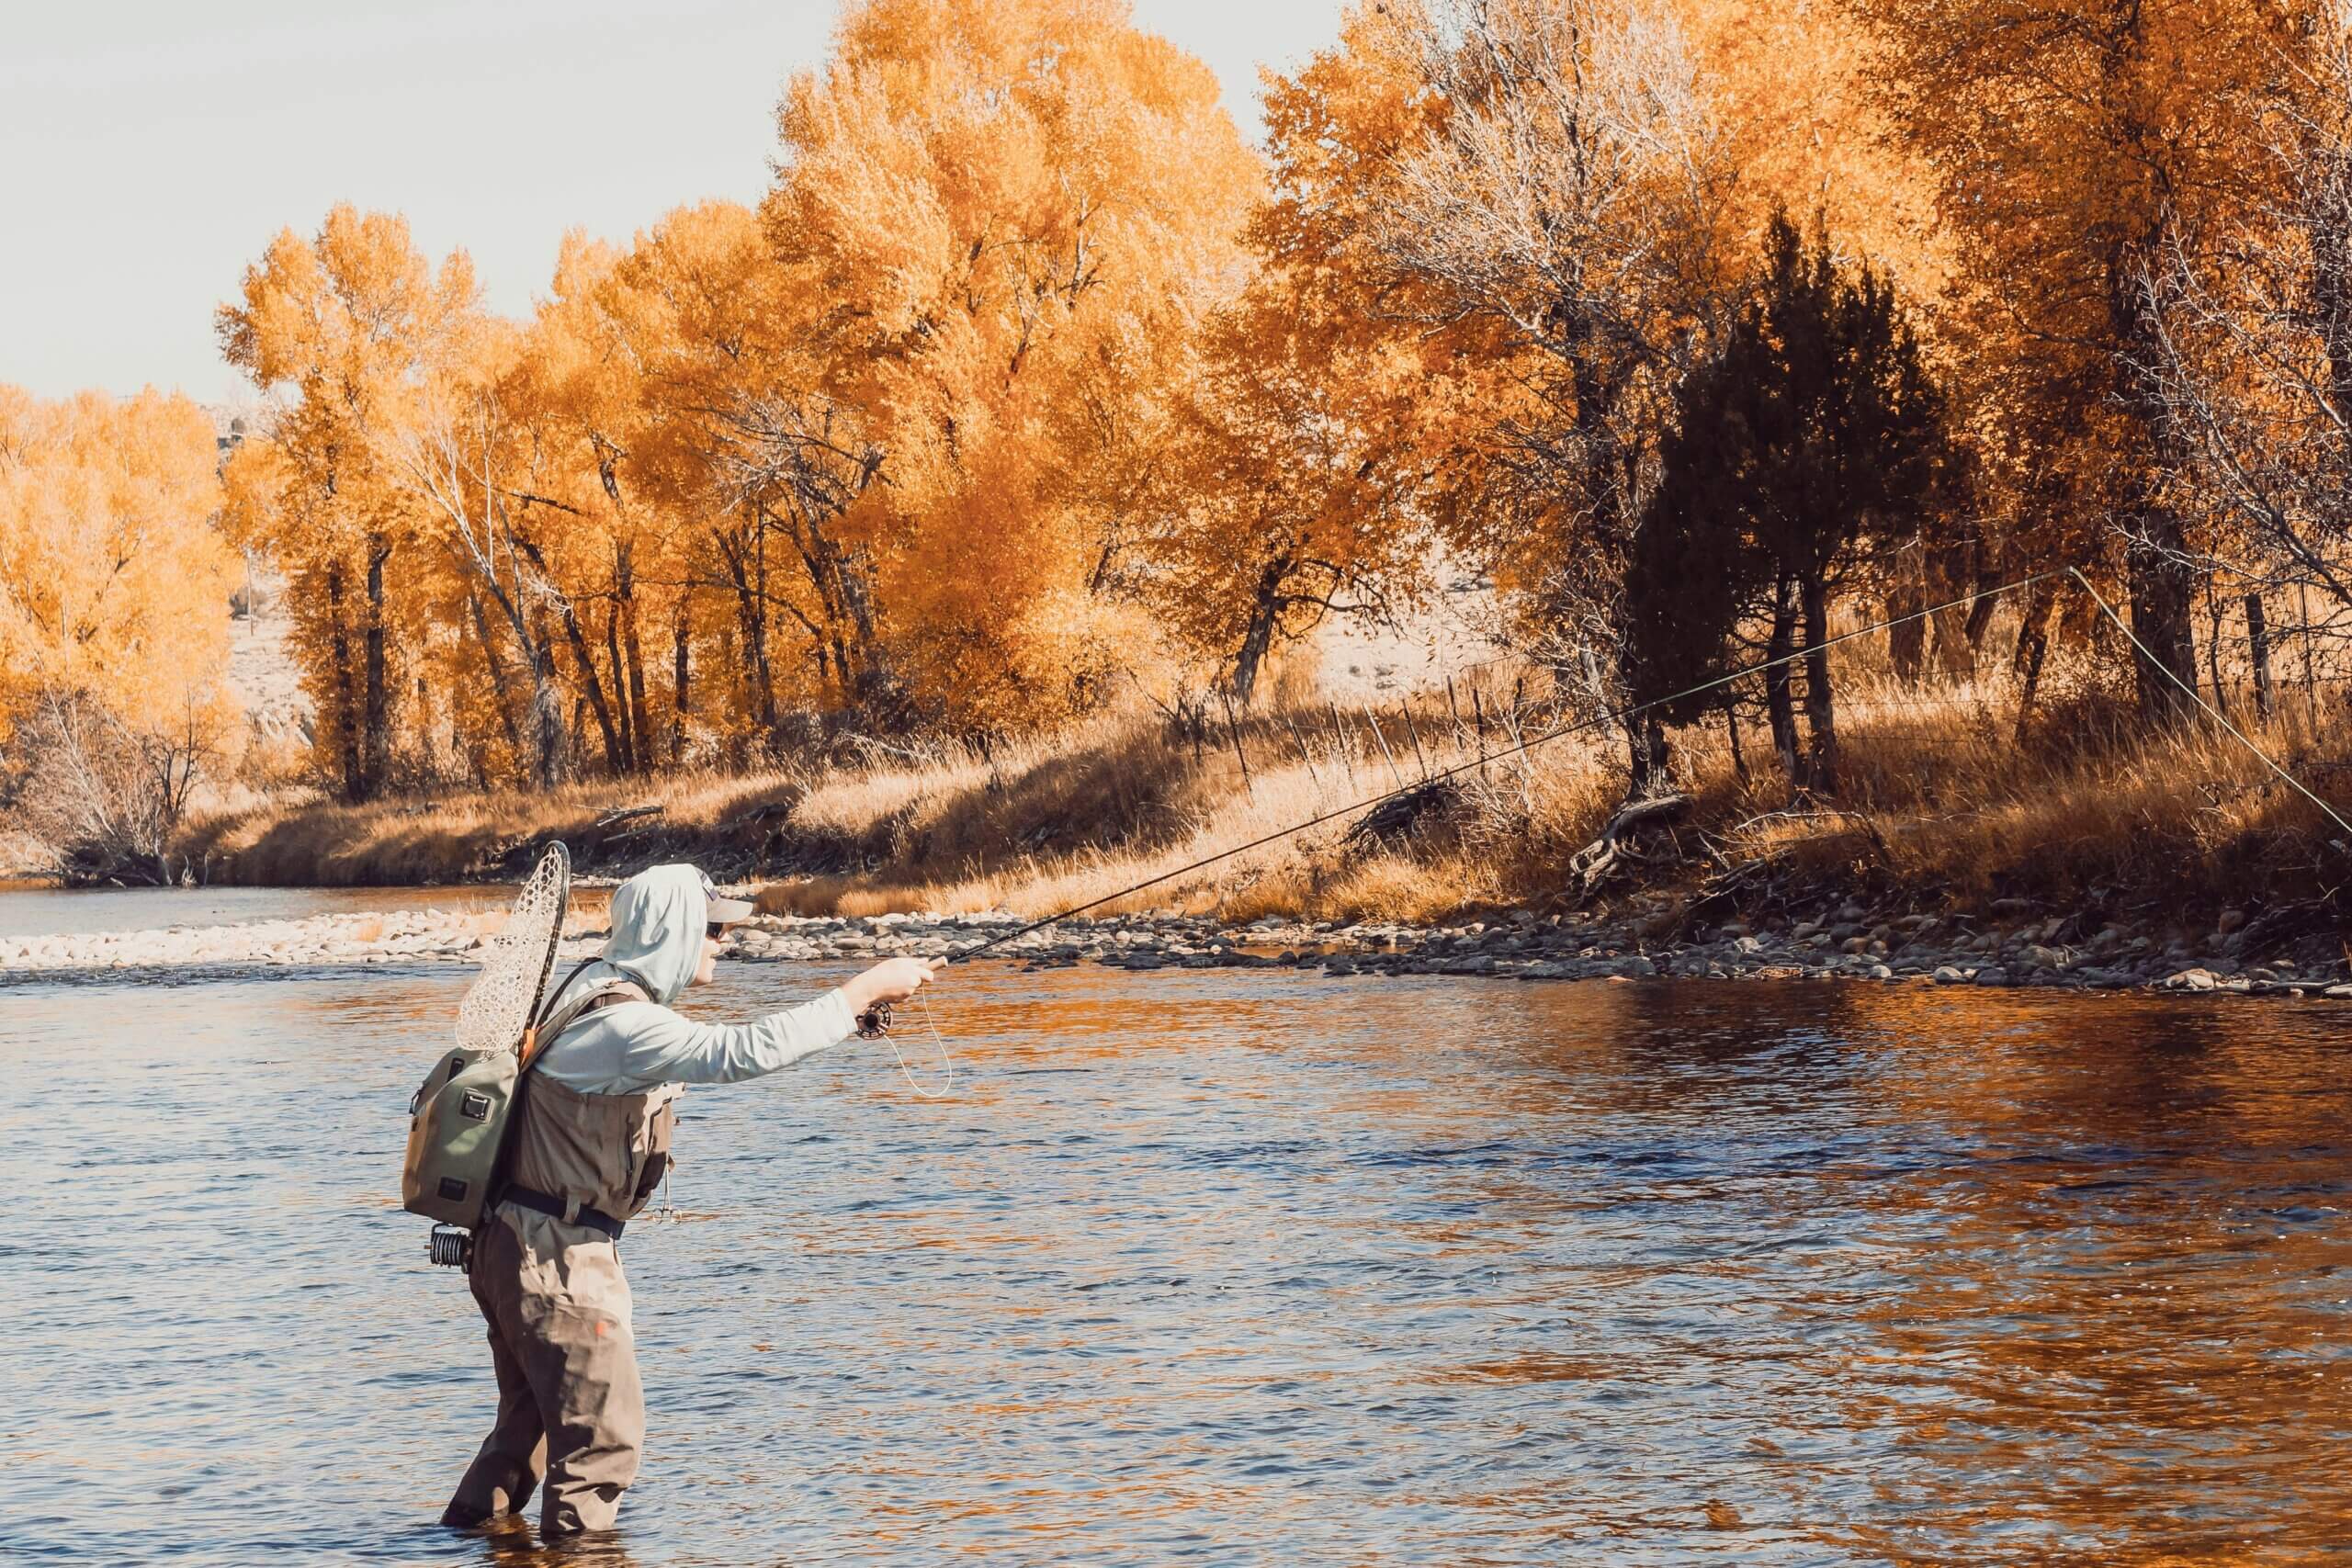 man casting on river in fall.